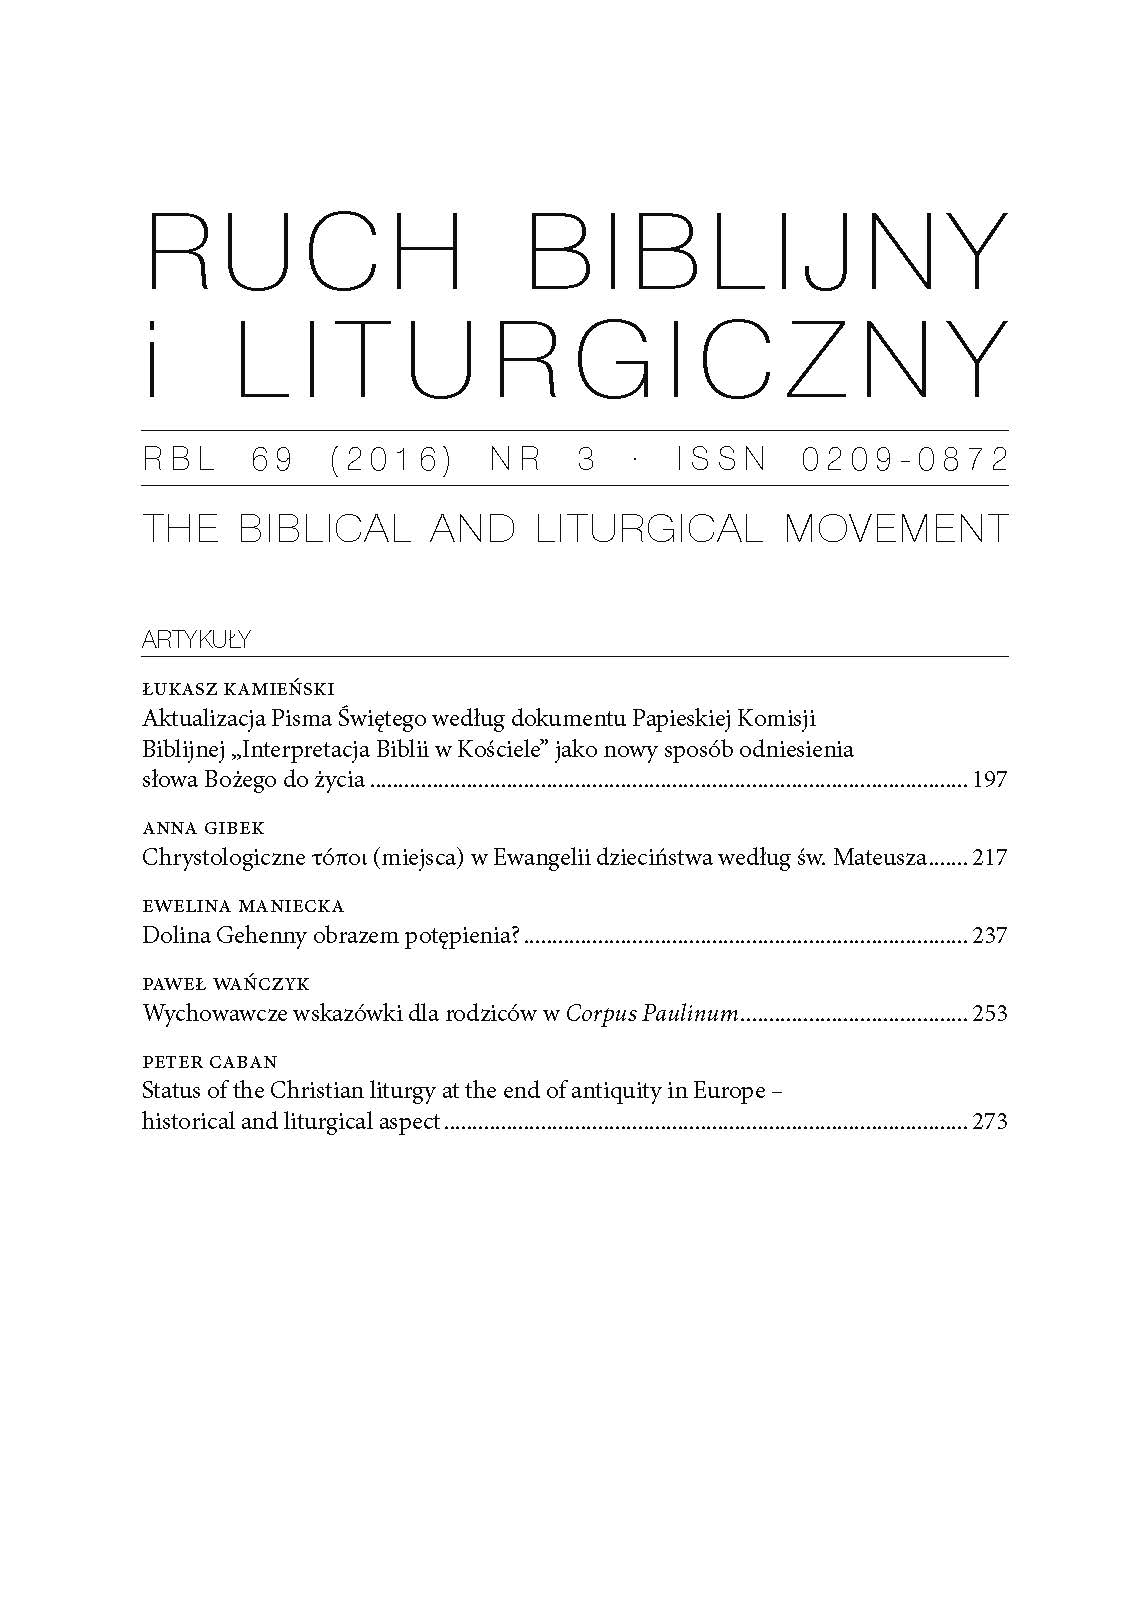 The Twenty-Ninth Liturgical Symposium  Historic and  Contemporary Understanding of the Sacrament of Penance  and Reconciliation  (Ląd on the Warta, October 16, 2015) Cover Image